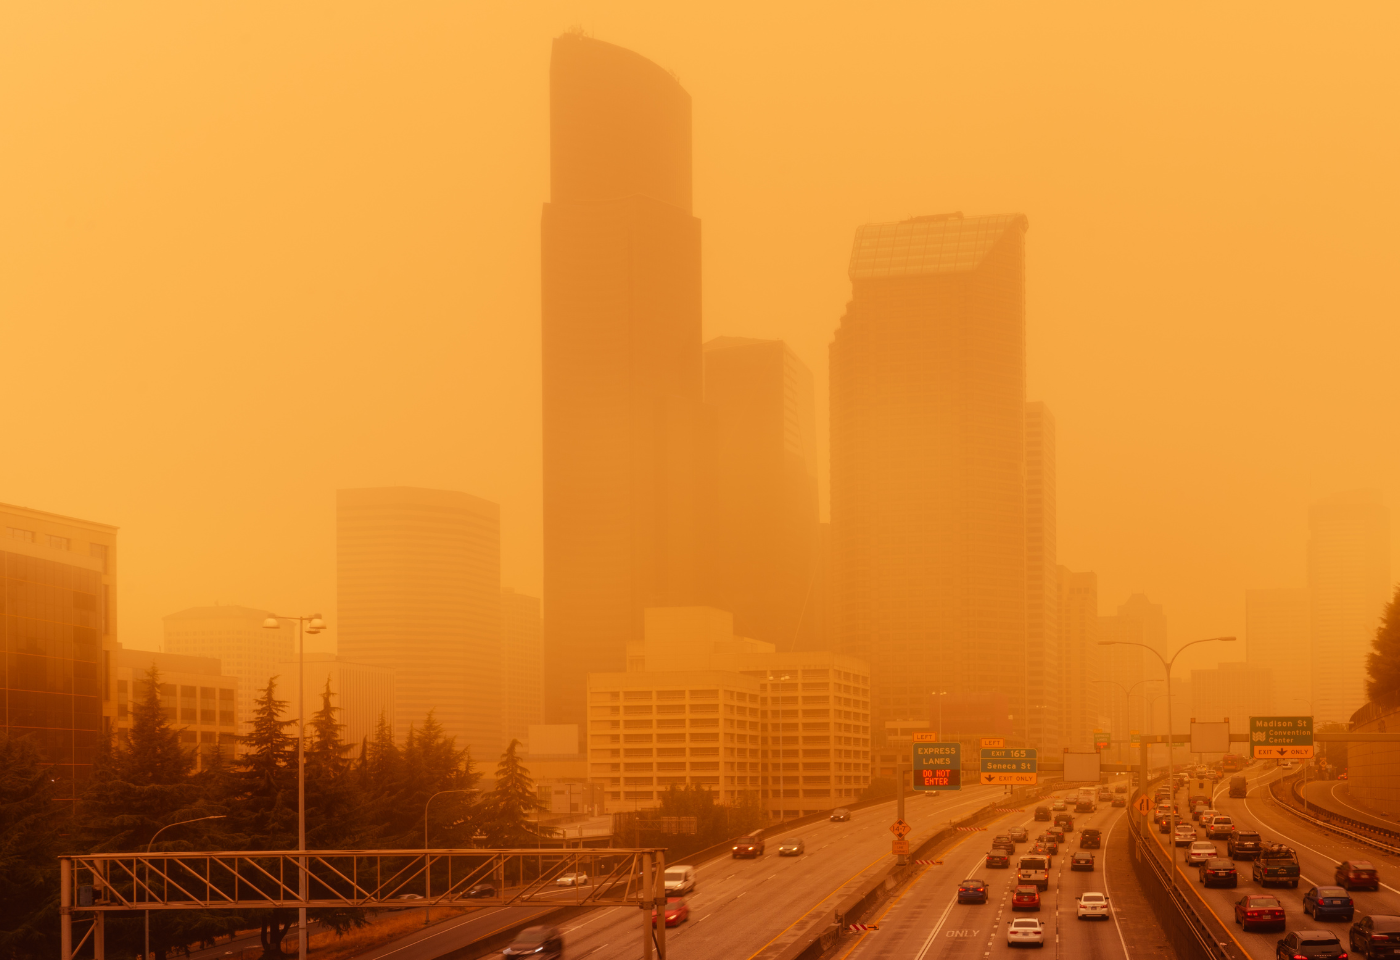 Seattle skyline and highway covered in orange wildfire smoke